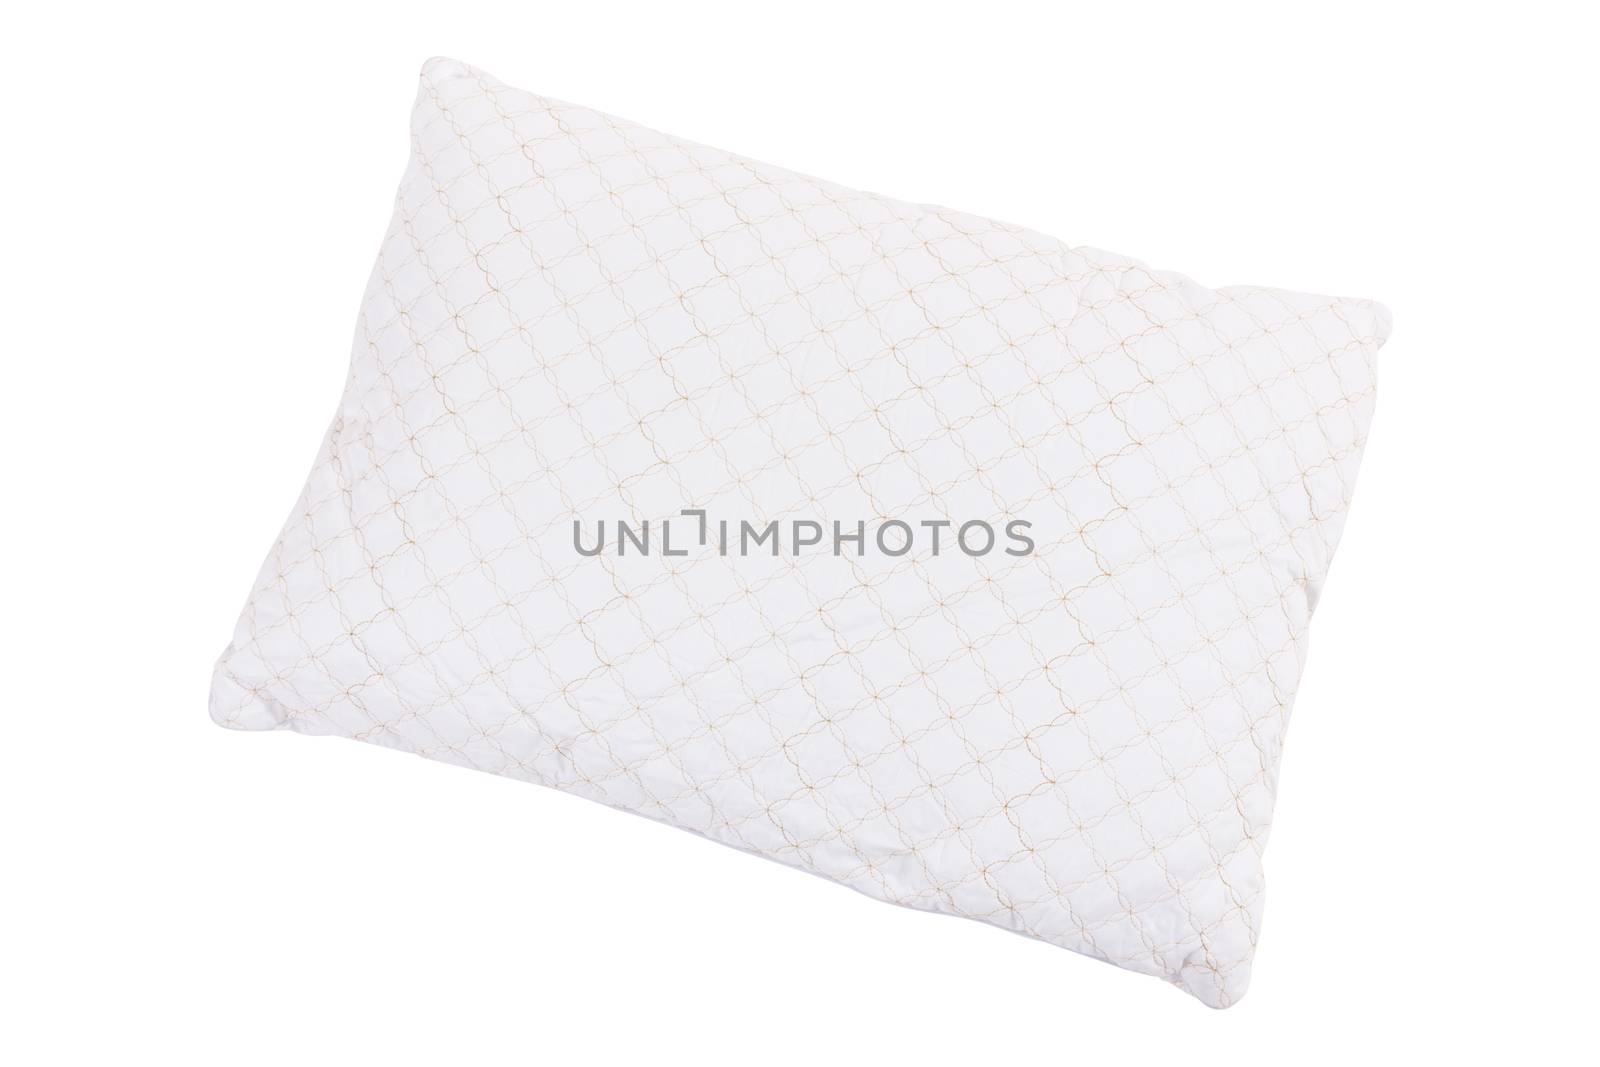 pillow isolated on white background in studio